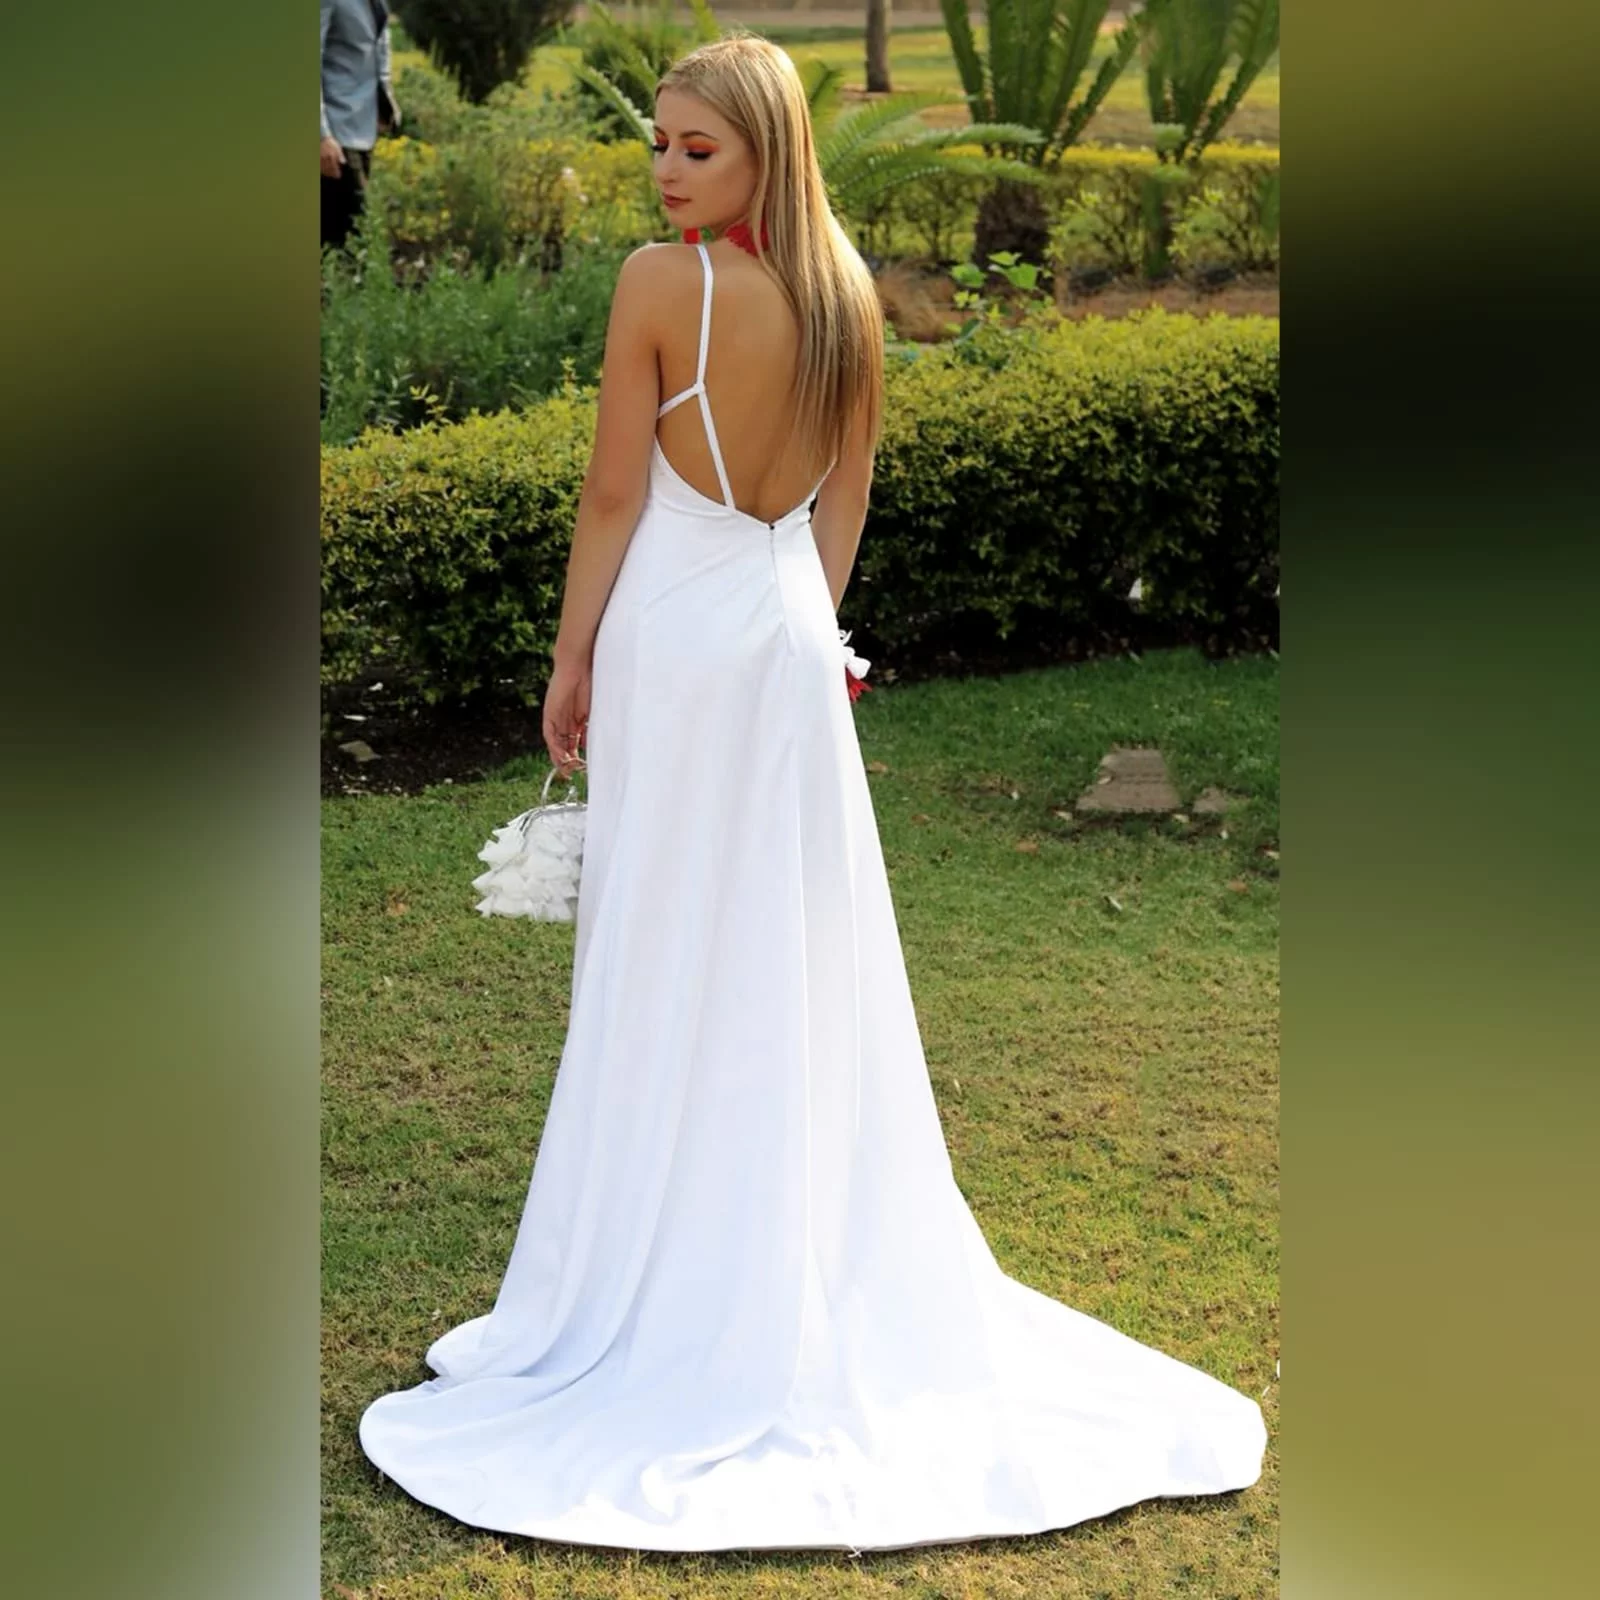 White satin long prom dress with a low open back 1 white satin long prom dress with a low open back, with strap detail. Straight neckline, 2 slits and a train.